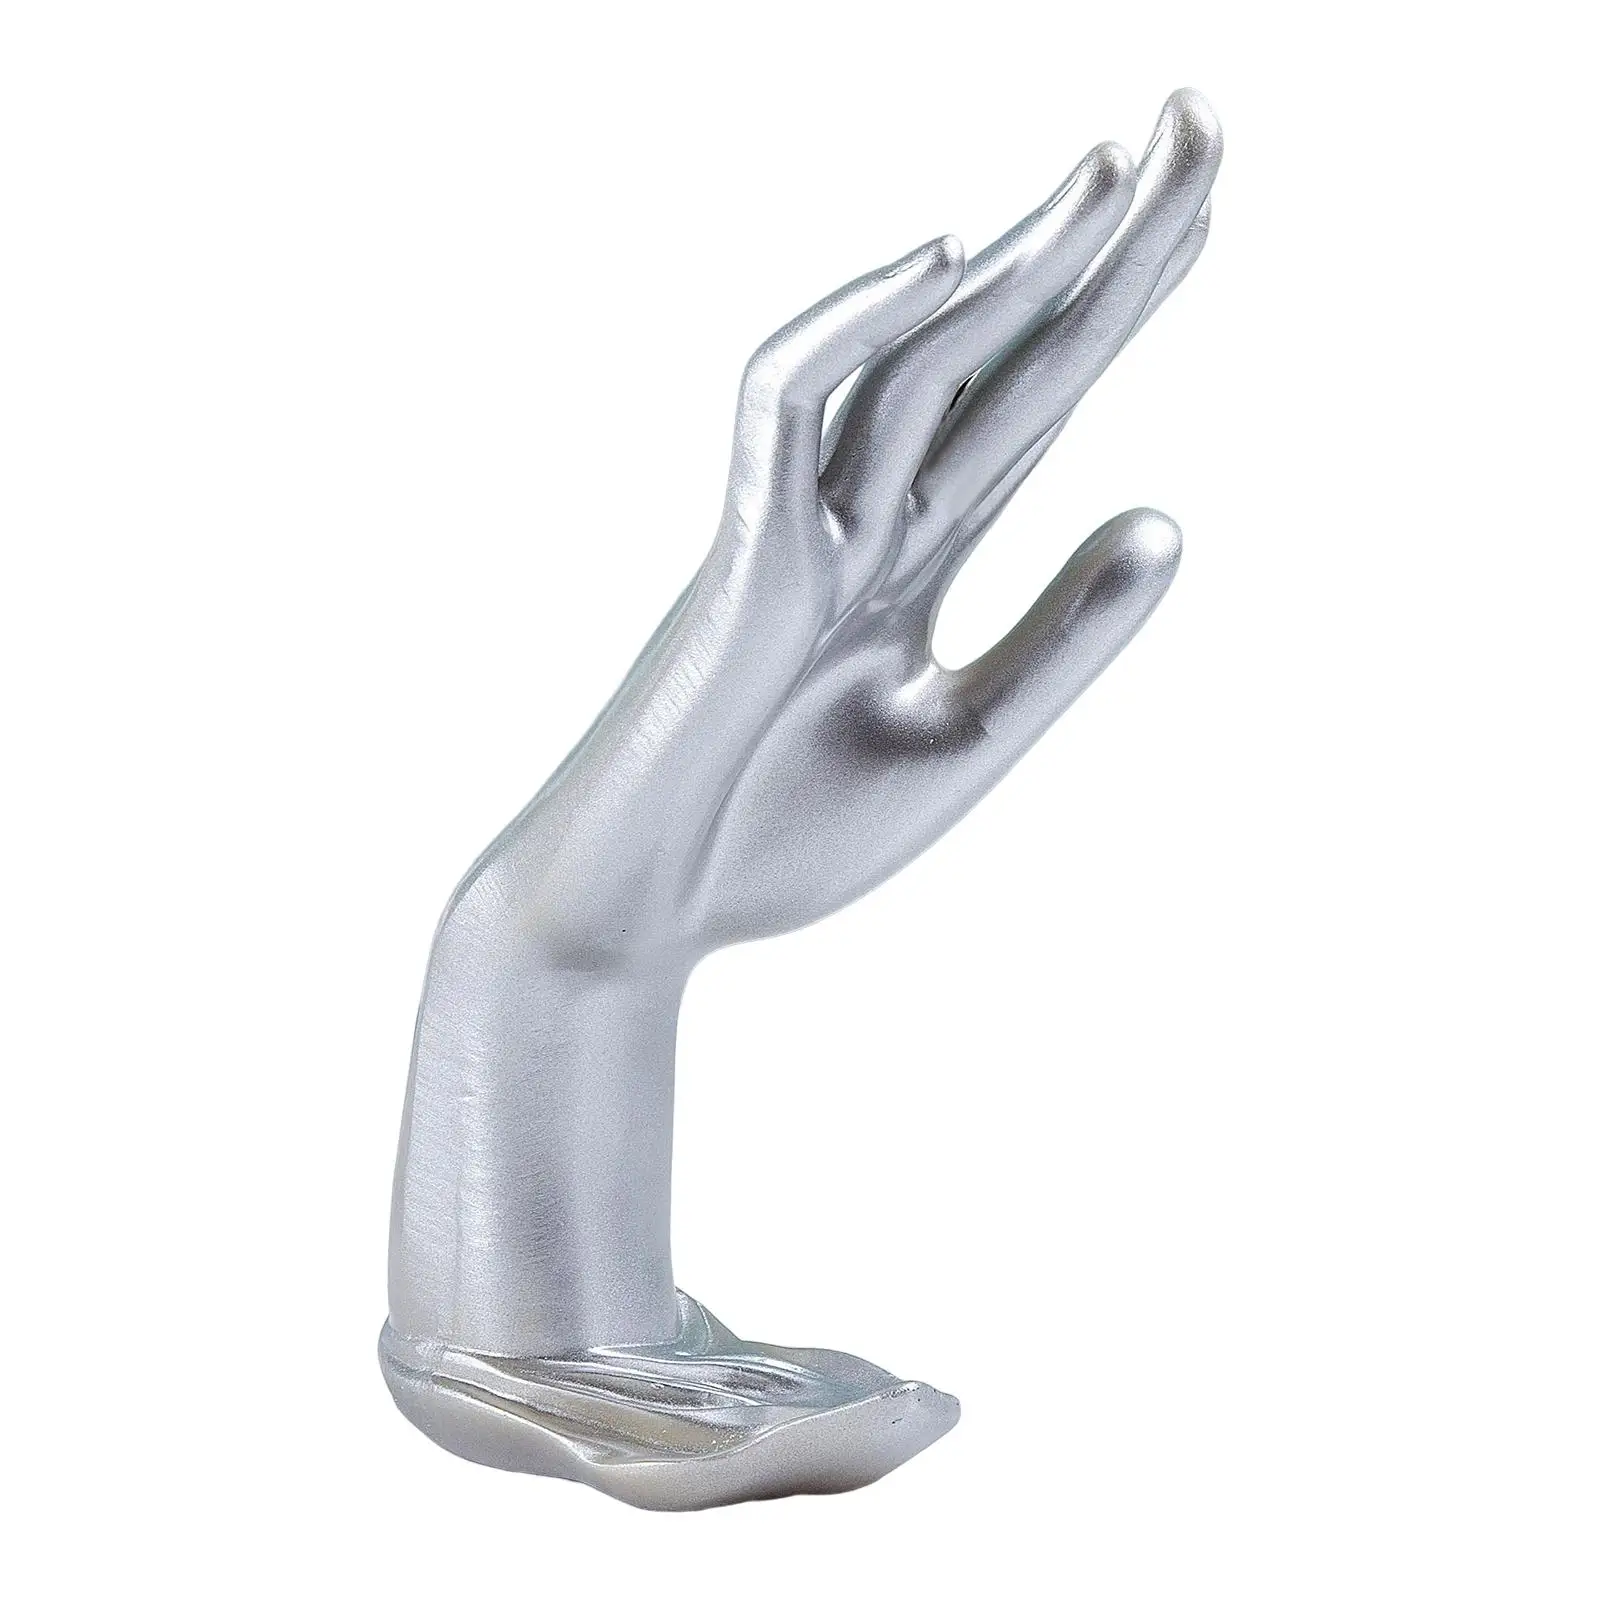 Gesture Rings Hand Holder Mannequin Hand Hand Chain Holder Show for Home